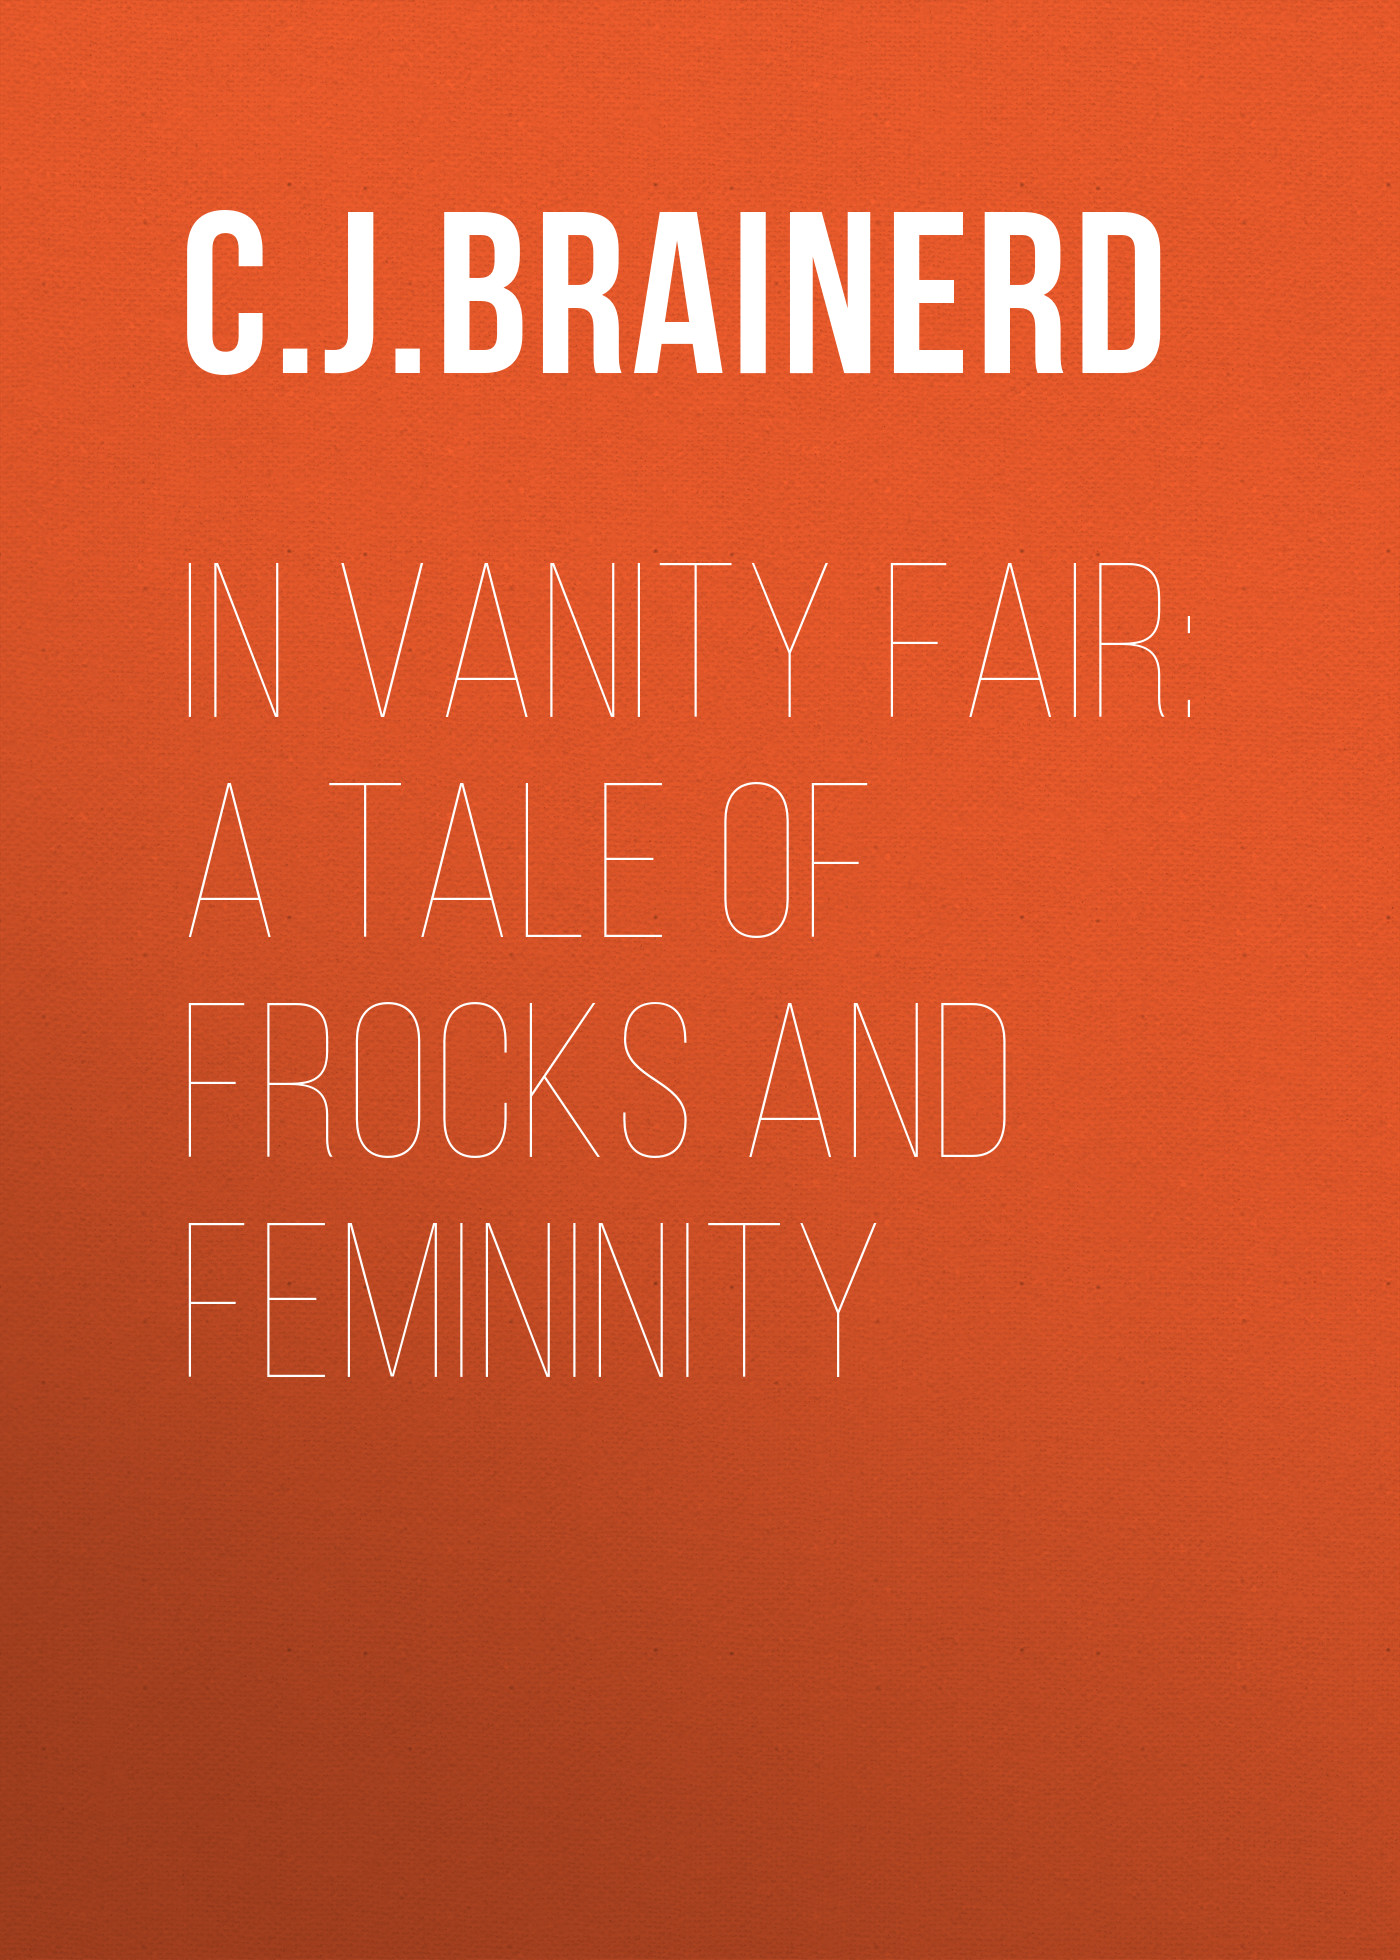 In Vanity Fair: A Tale of Frocks and Femininity